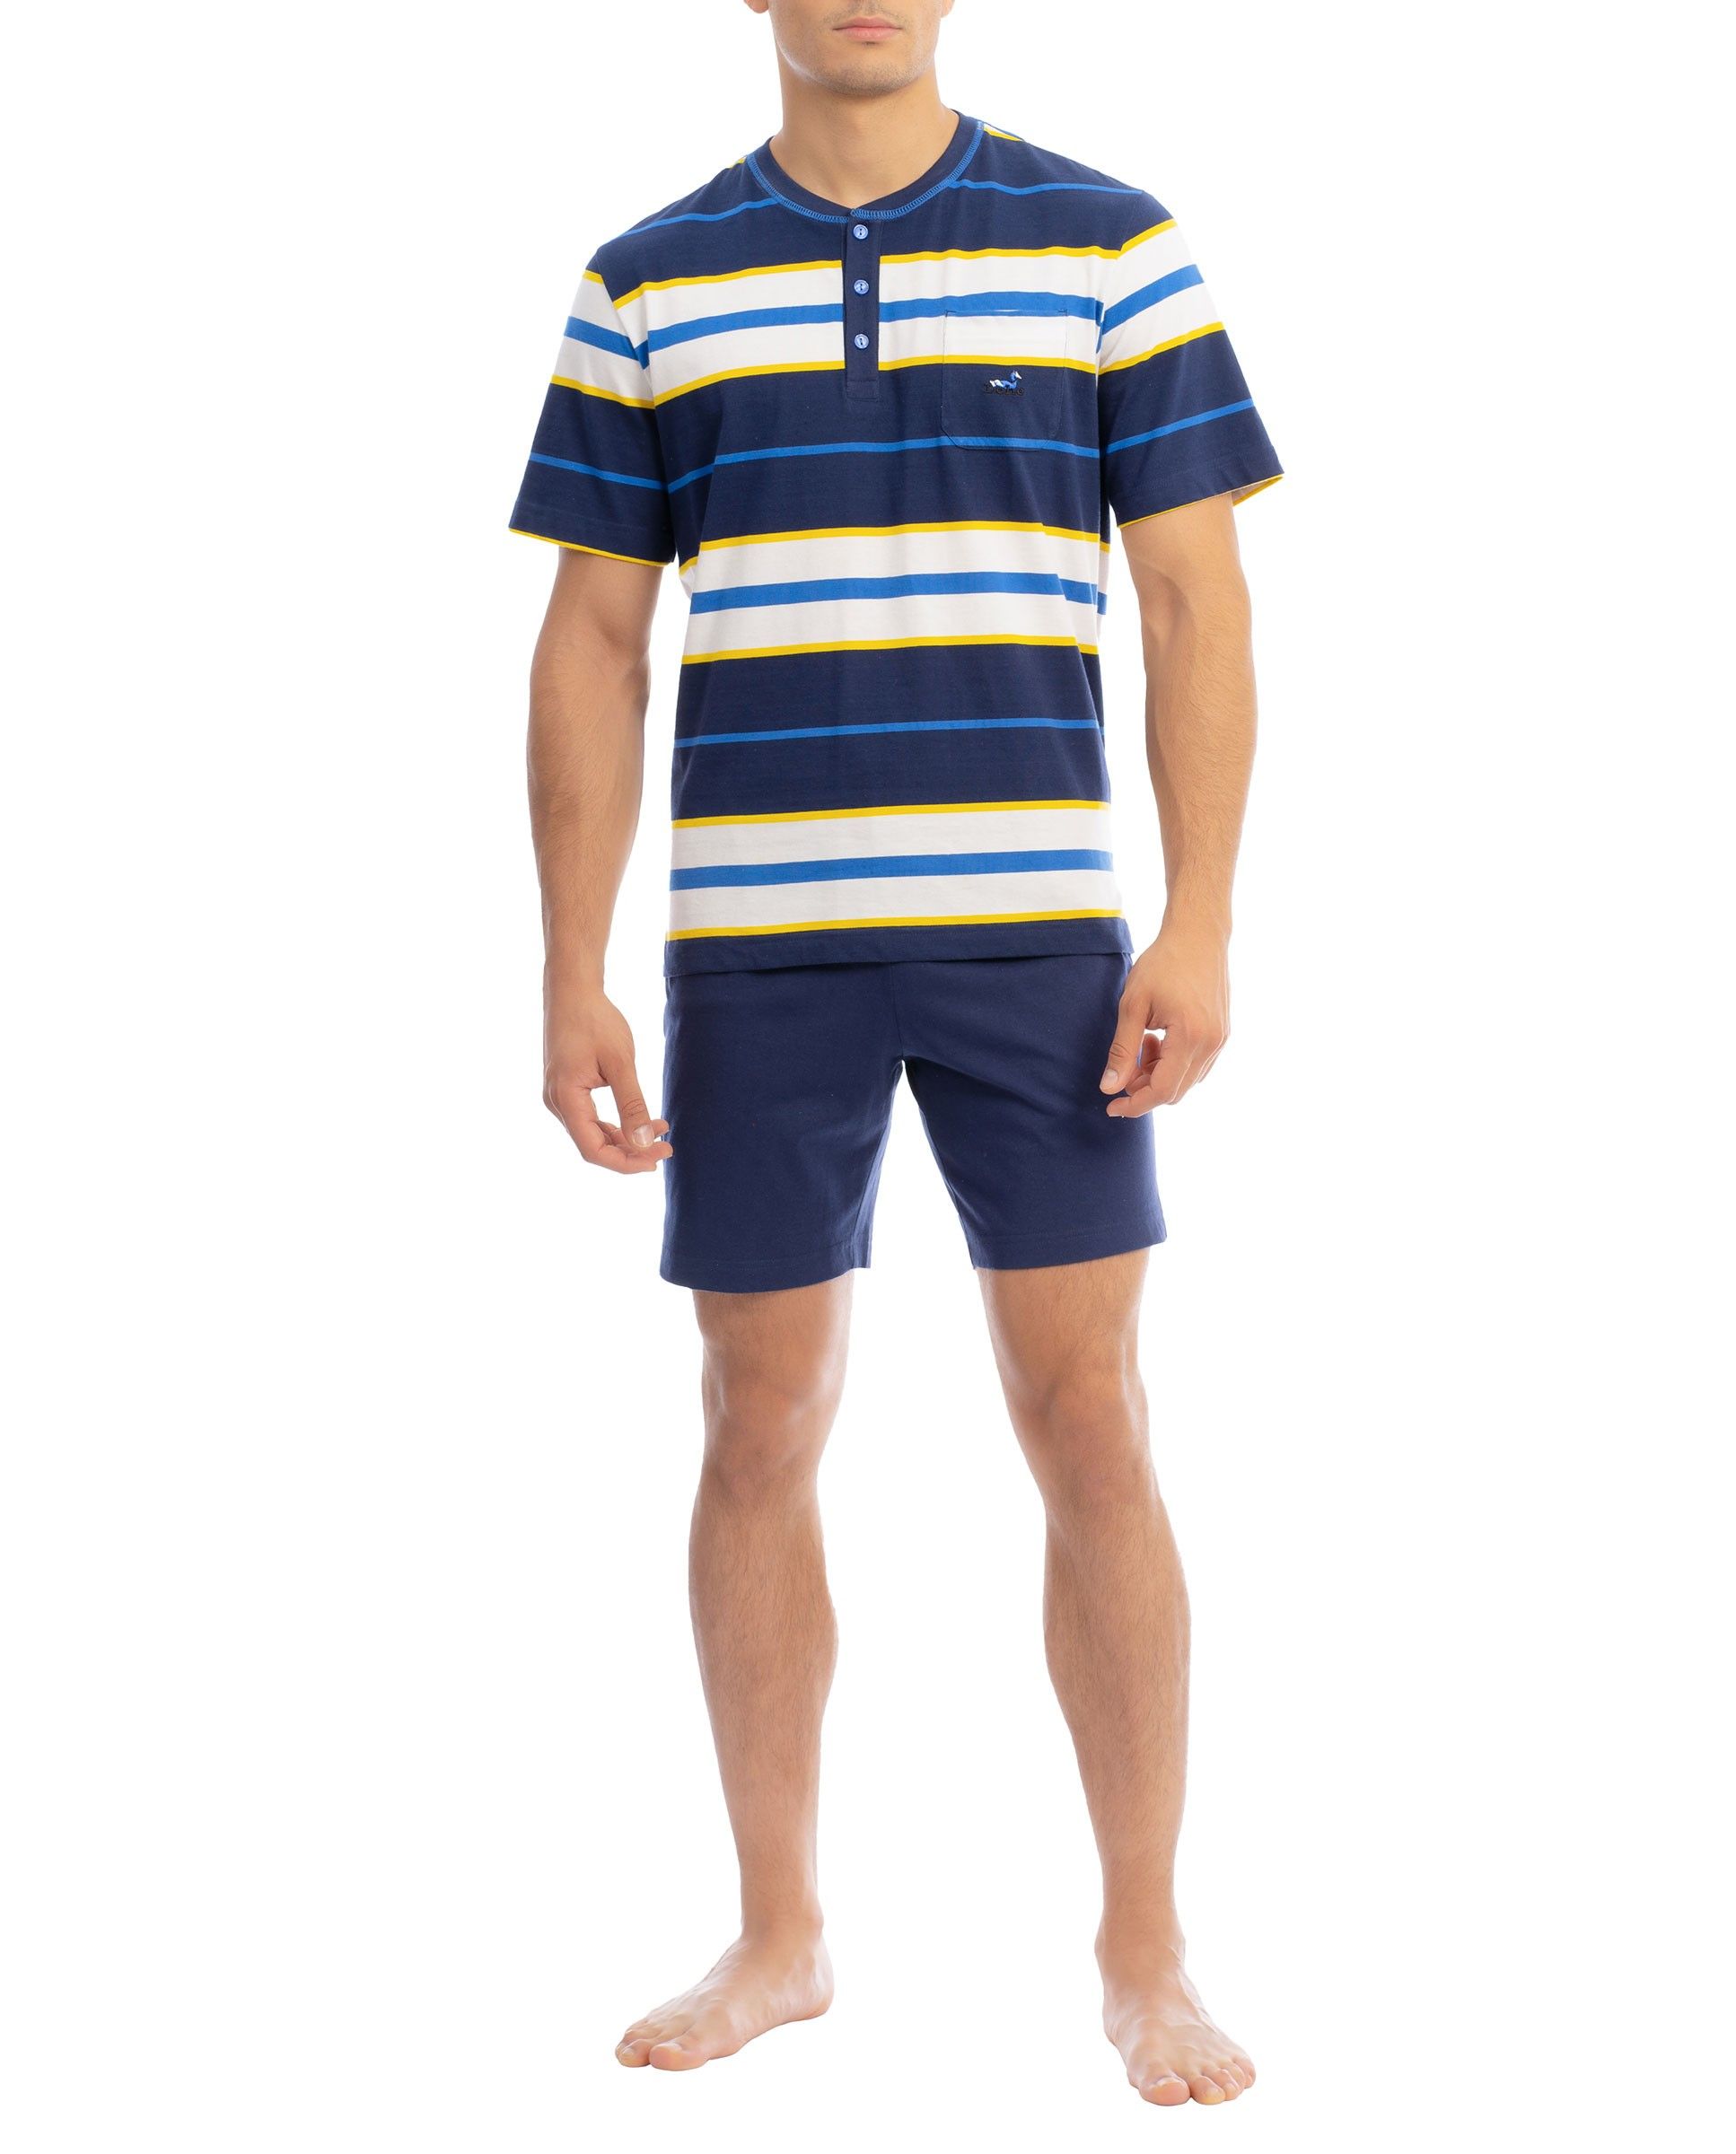 Men's short sleeve striped pyjama shorts with round neck and plain trousers